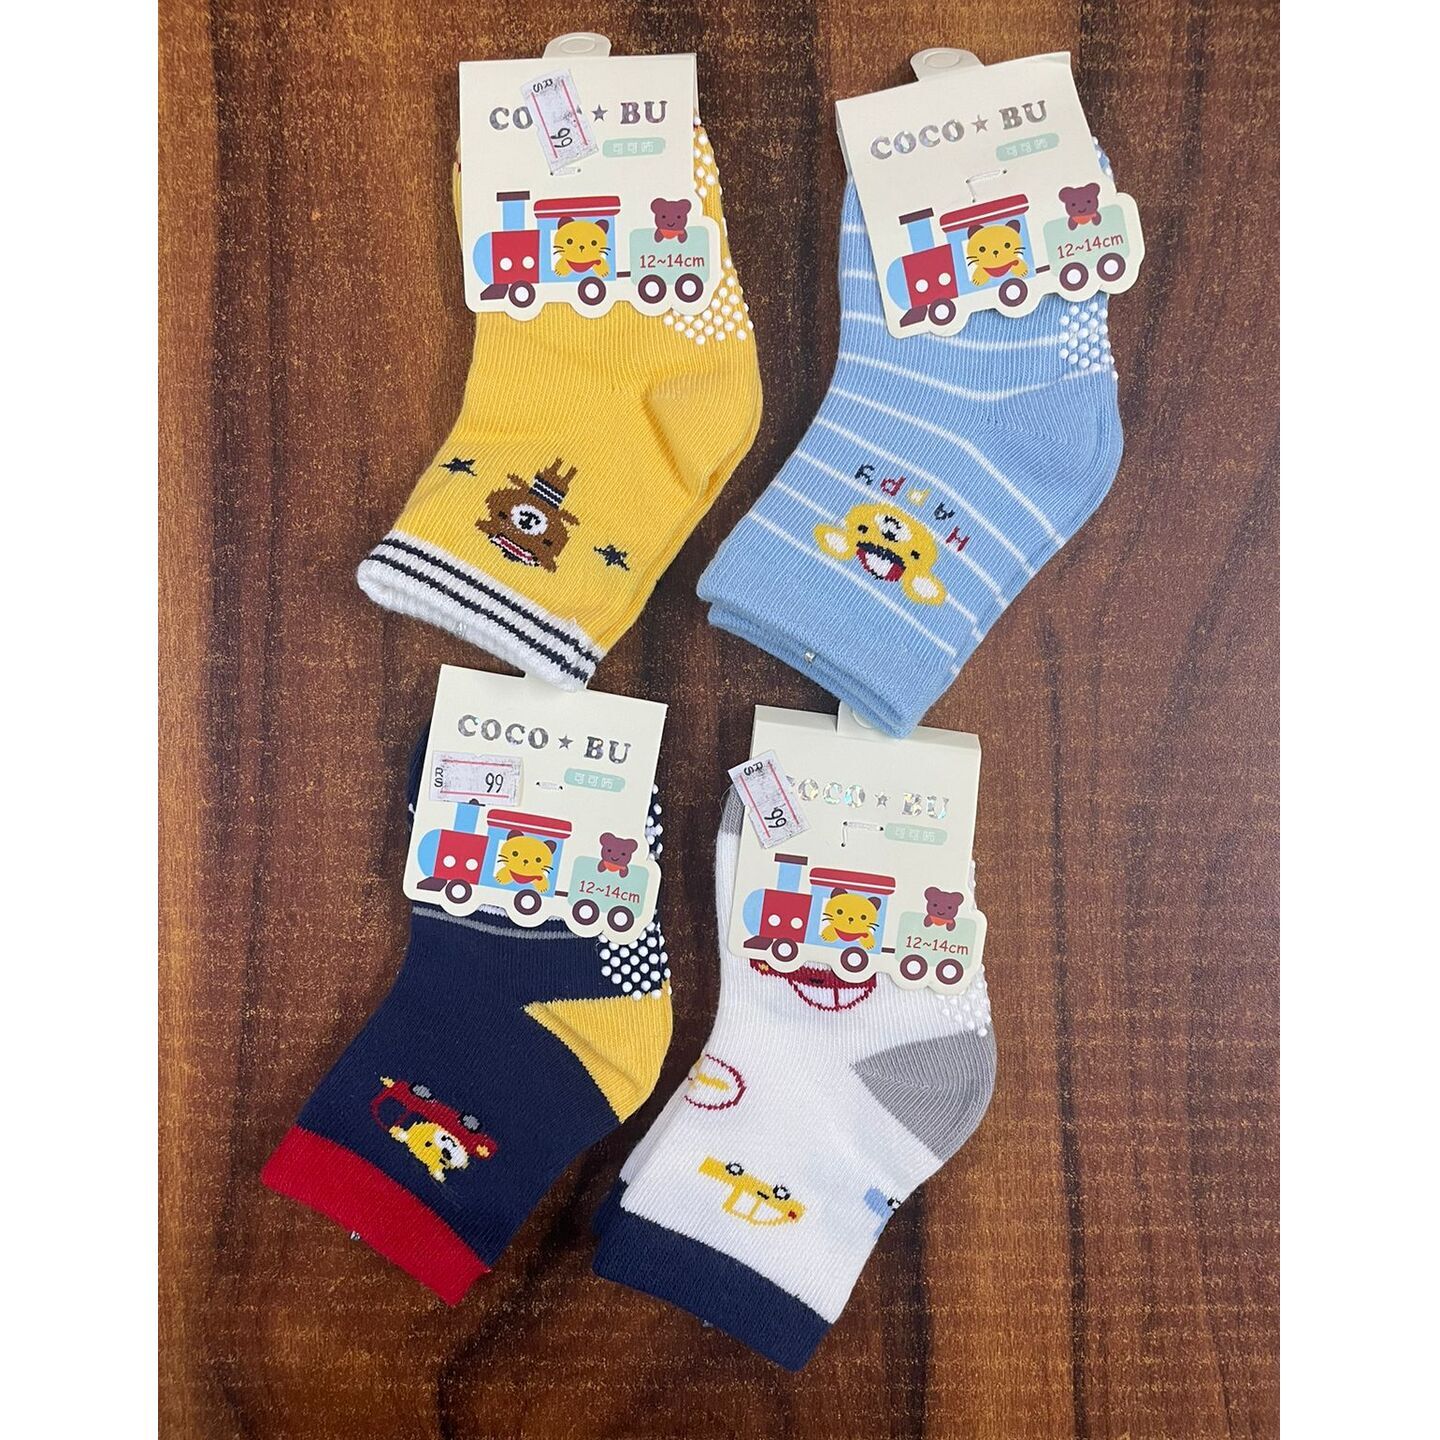 Cotton Socks 1 Pair Rs 99 Only 2 to 3 Years Size